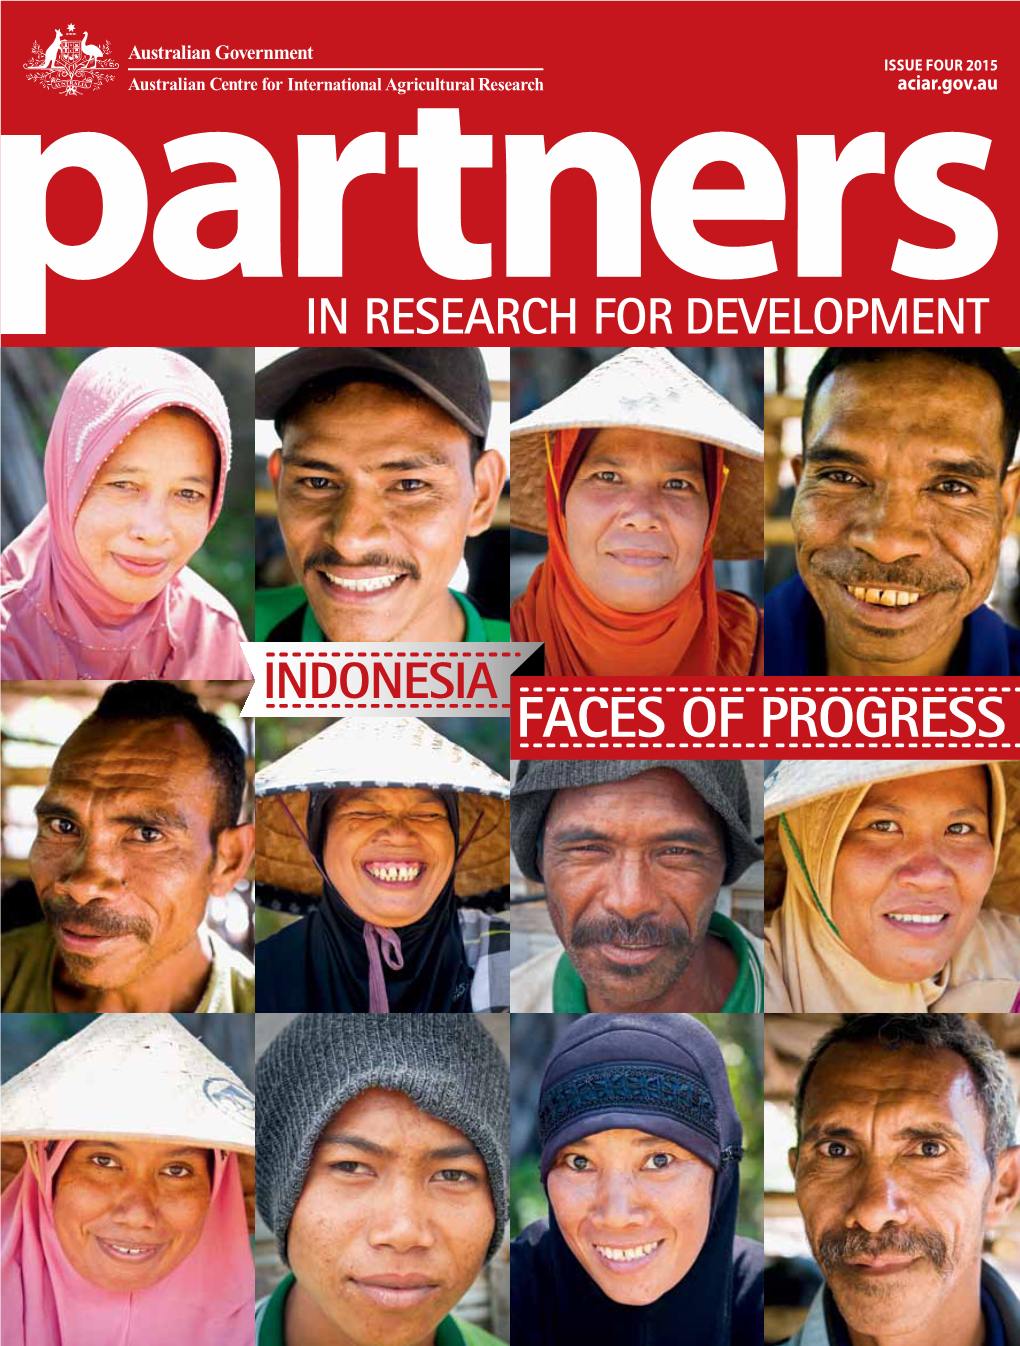 FACES of PROGRESS 2 Foreword Issue Four 2015 PARTNERS Development, Innovation and Adaptation